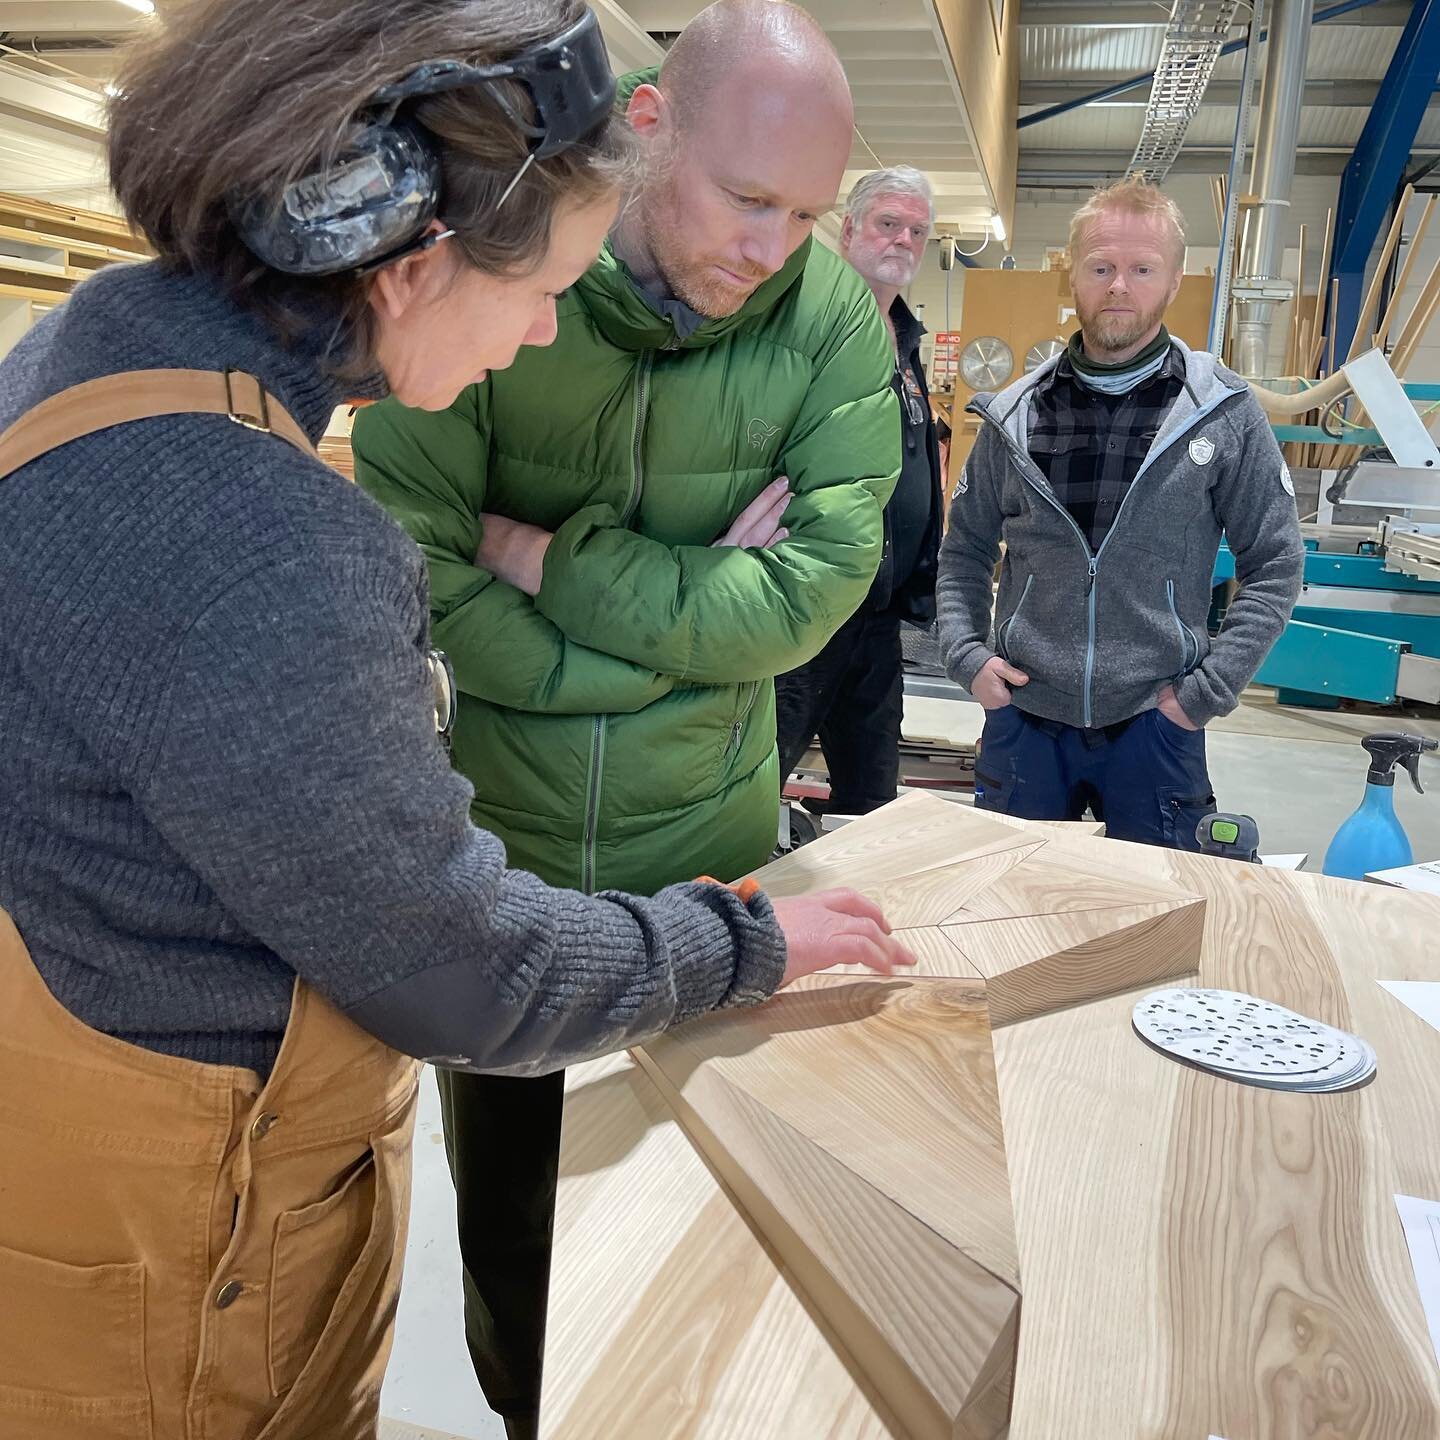 Excited to see this wooden ash table that Audun designed at NRK for The World Championships of Nordic Skiing in Planicia +  The World Championships of Biathlon in Oberhof. The table is constructed so it can be compact under transportation.  Wonderful